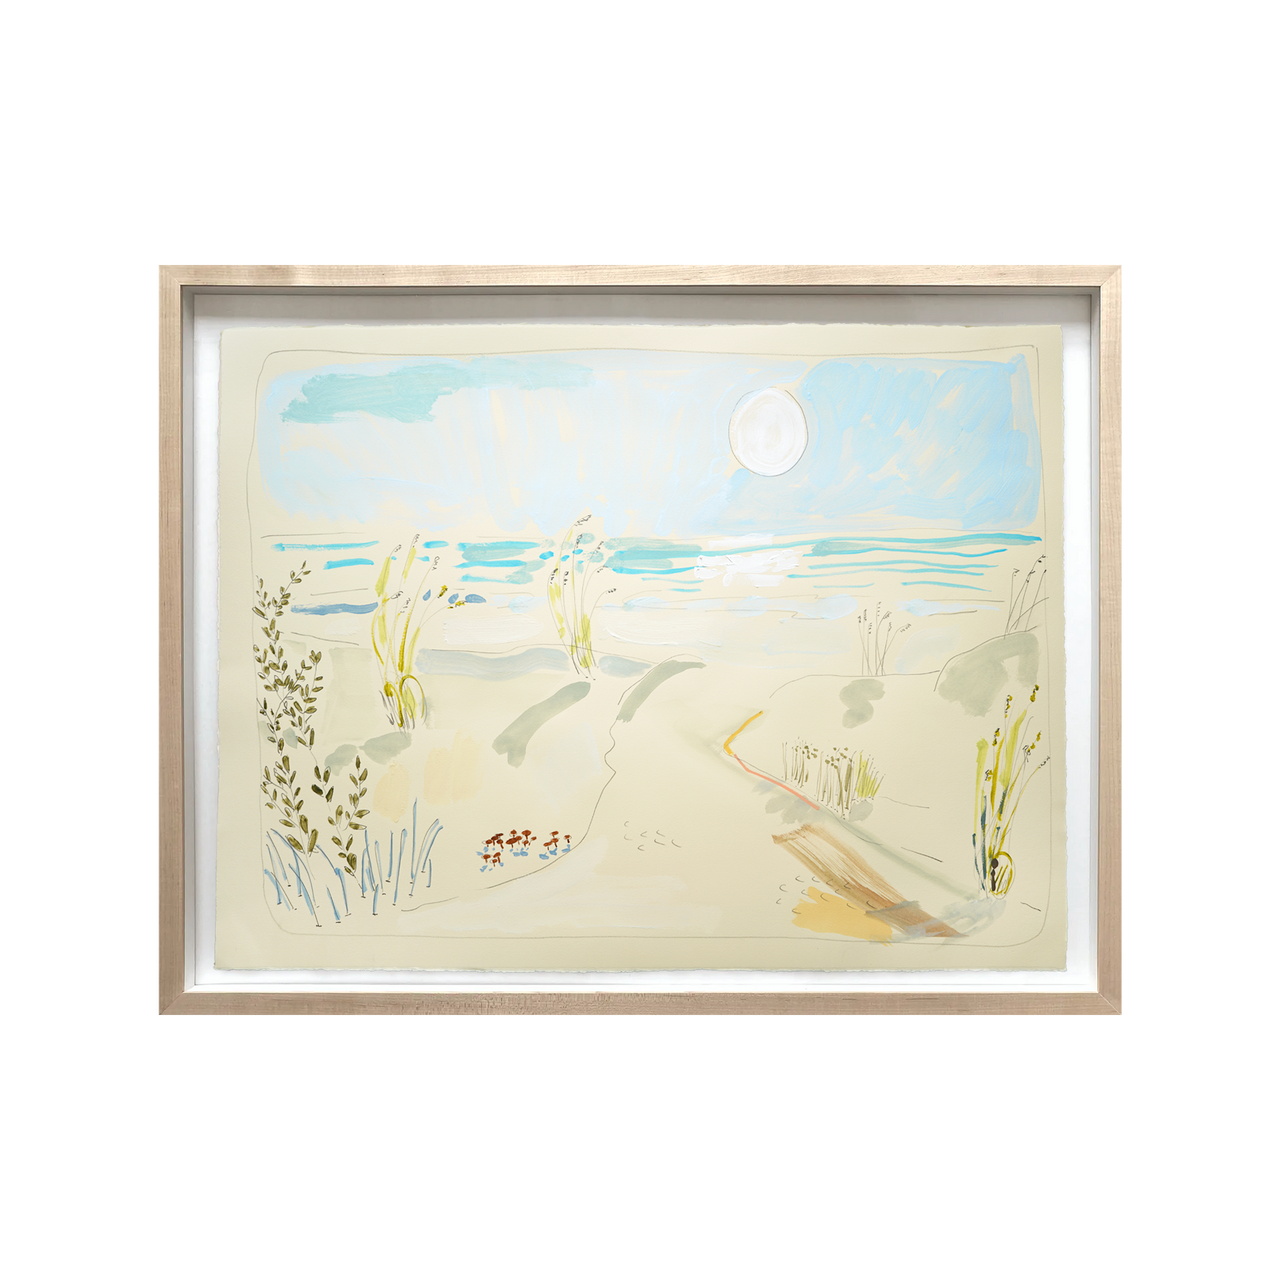 Pathway to the Beach - No. 3